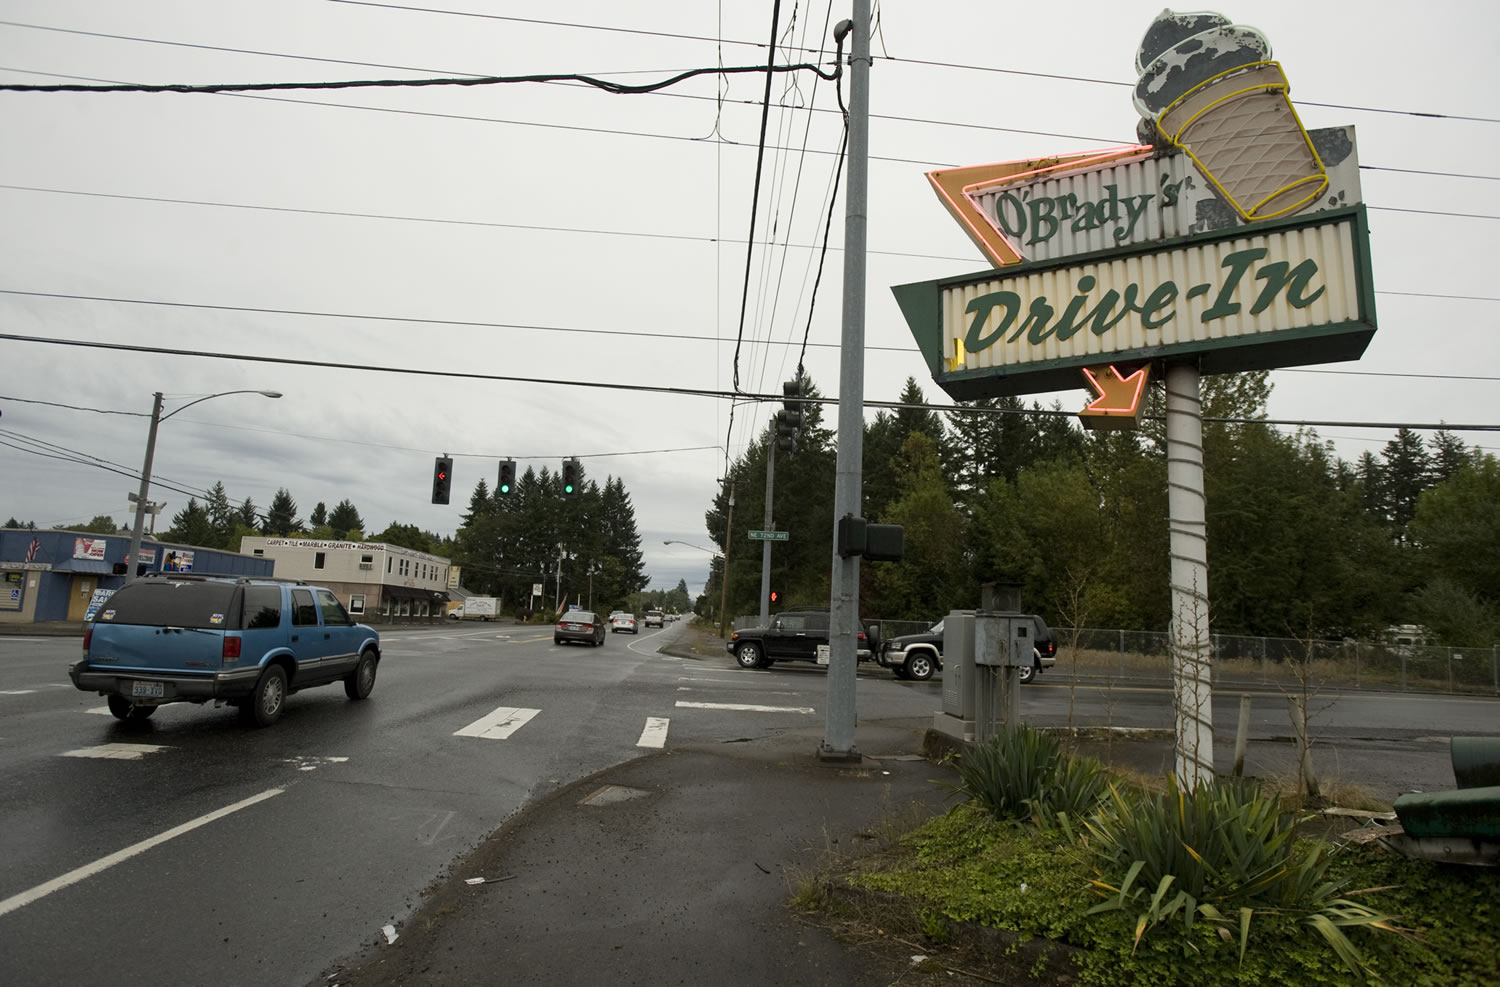 Businesses along Highway 502 near Dollars Corner, shown in 2011, are on the list of unresolved acquisitions includes the former site of O'Brady's Drive-In, which closed in 2012 amid a compensation dispute as WSDOT works to acquire at least part of the property.